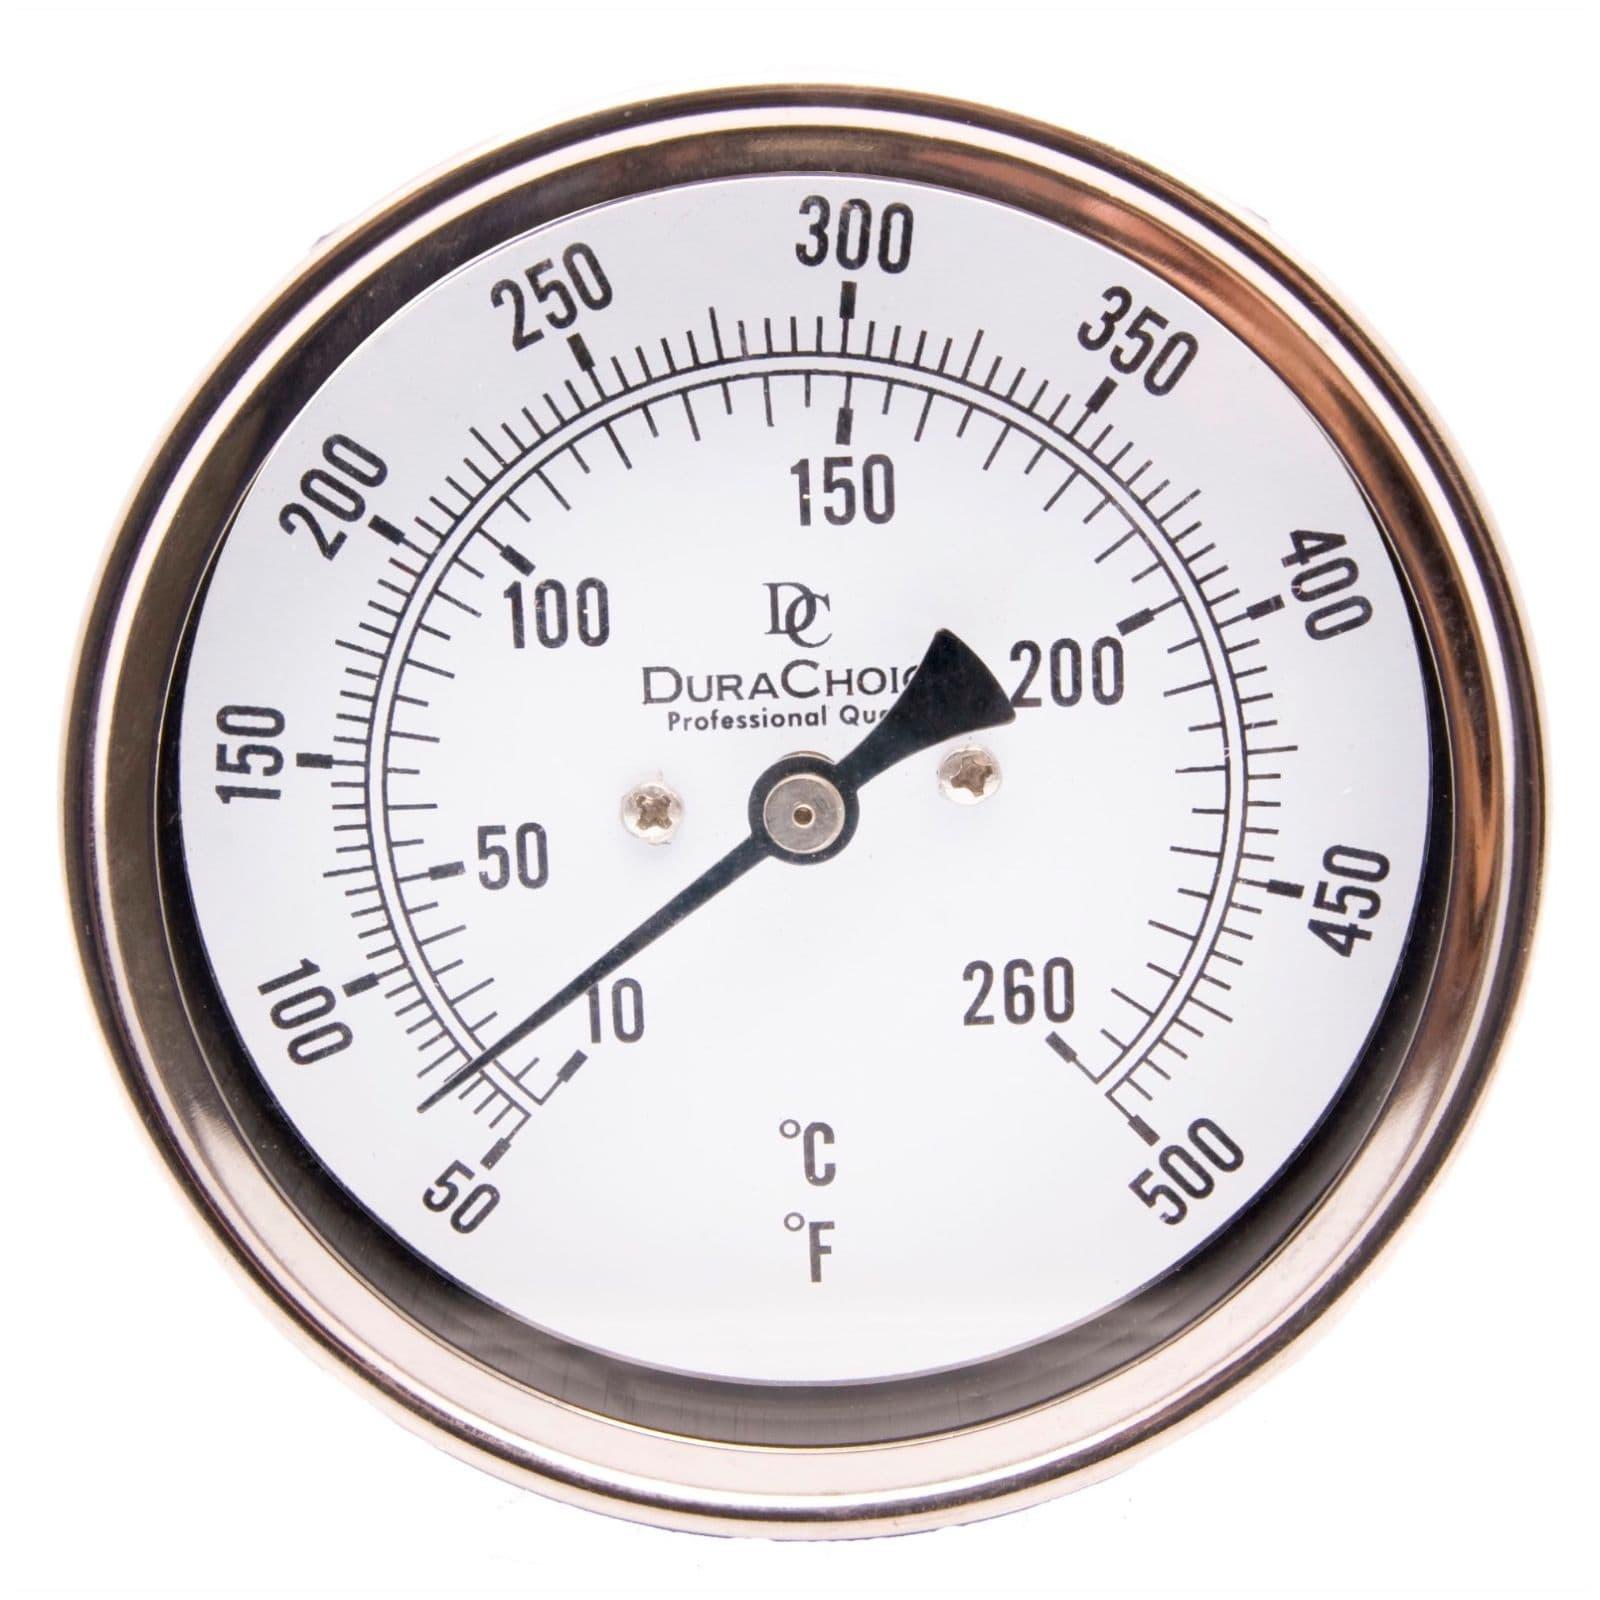 https://www.directmaterial.com/site/assets/images/products/industrial-bimetal-thermometer-5-face-stainless-steel-case-w-calibration-dial_main-0.jpg